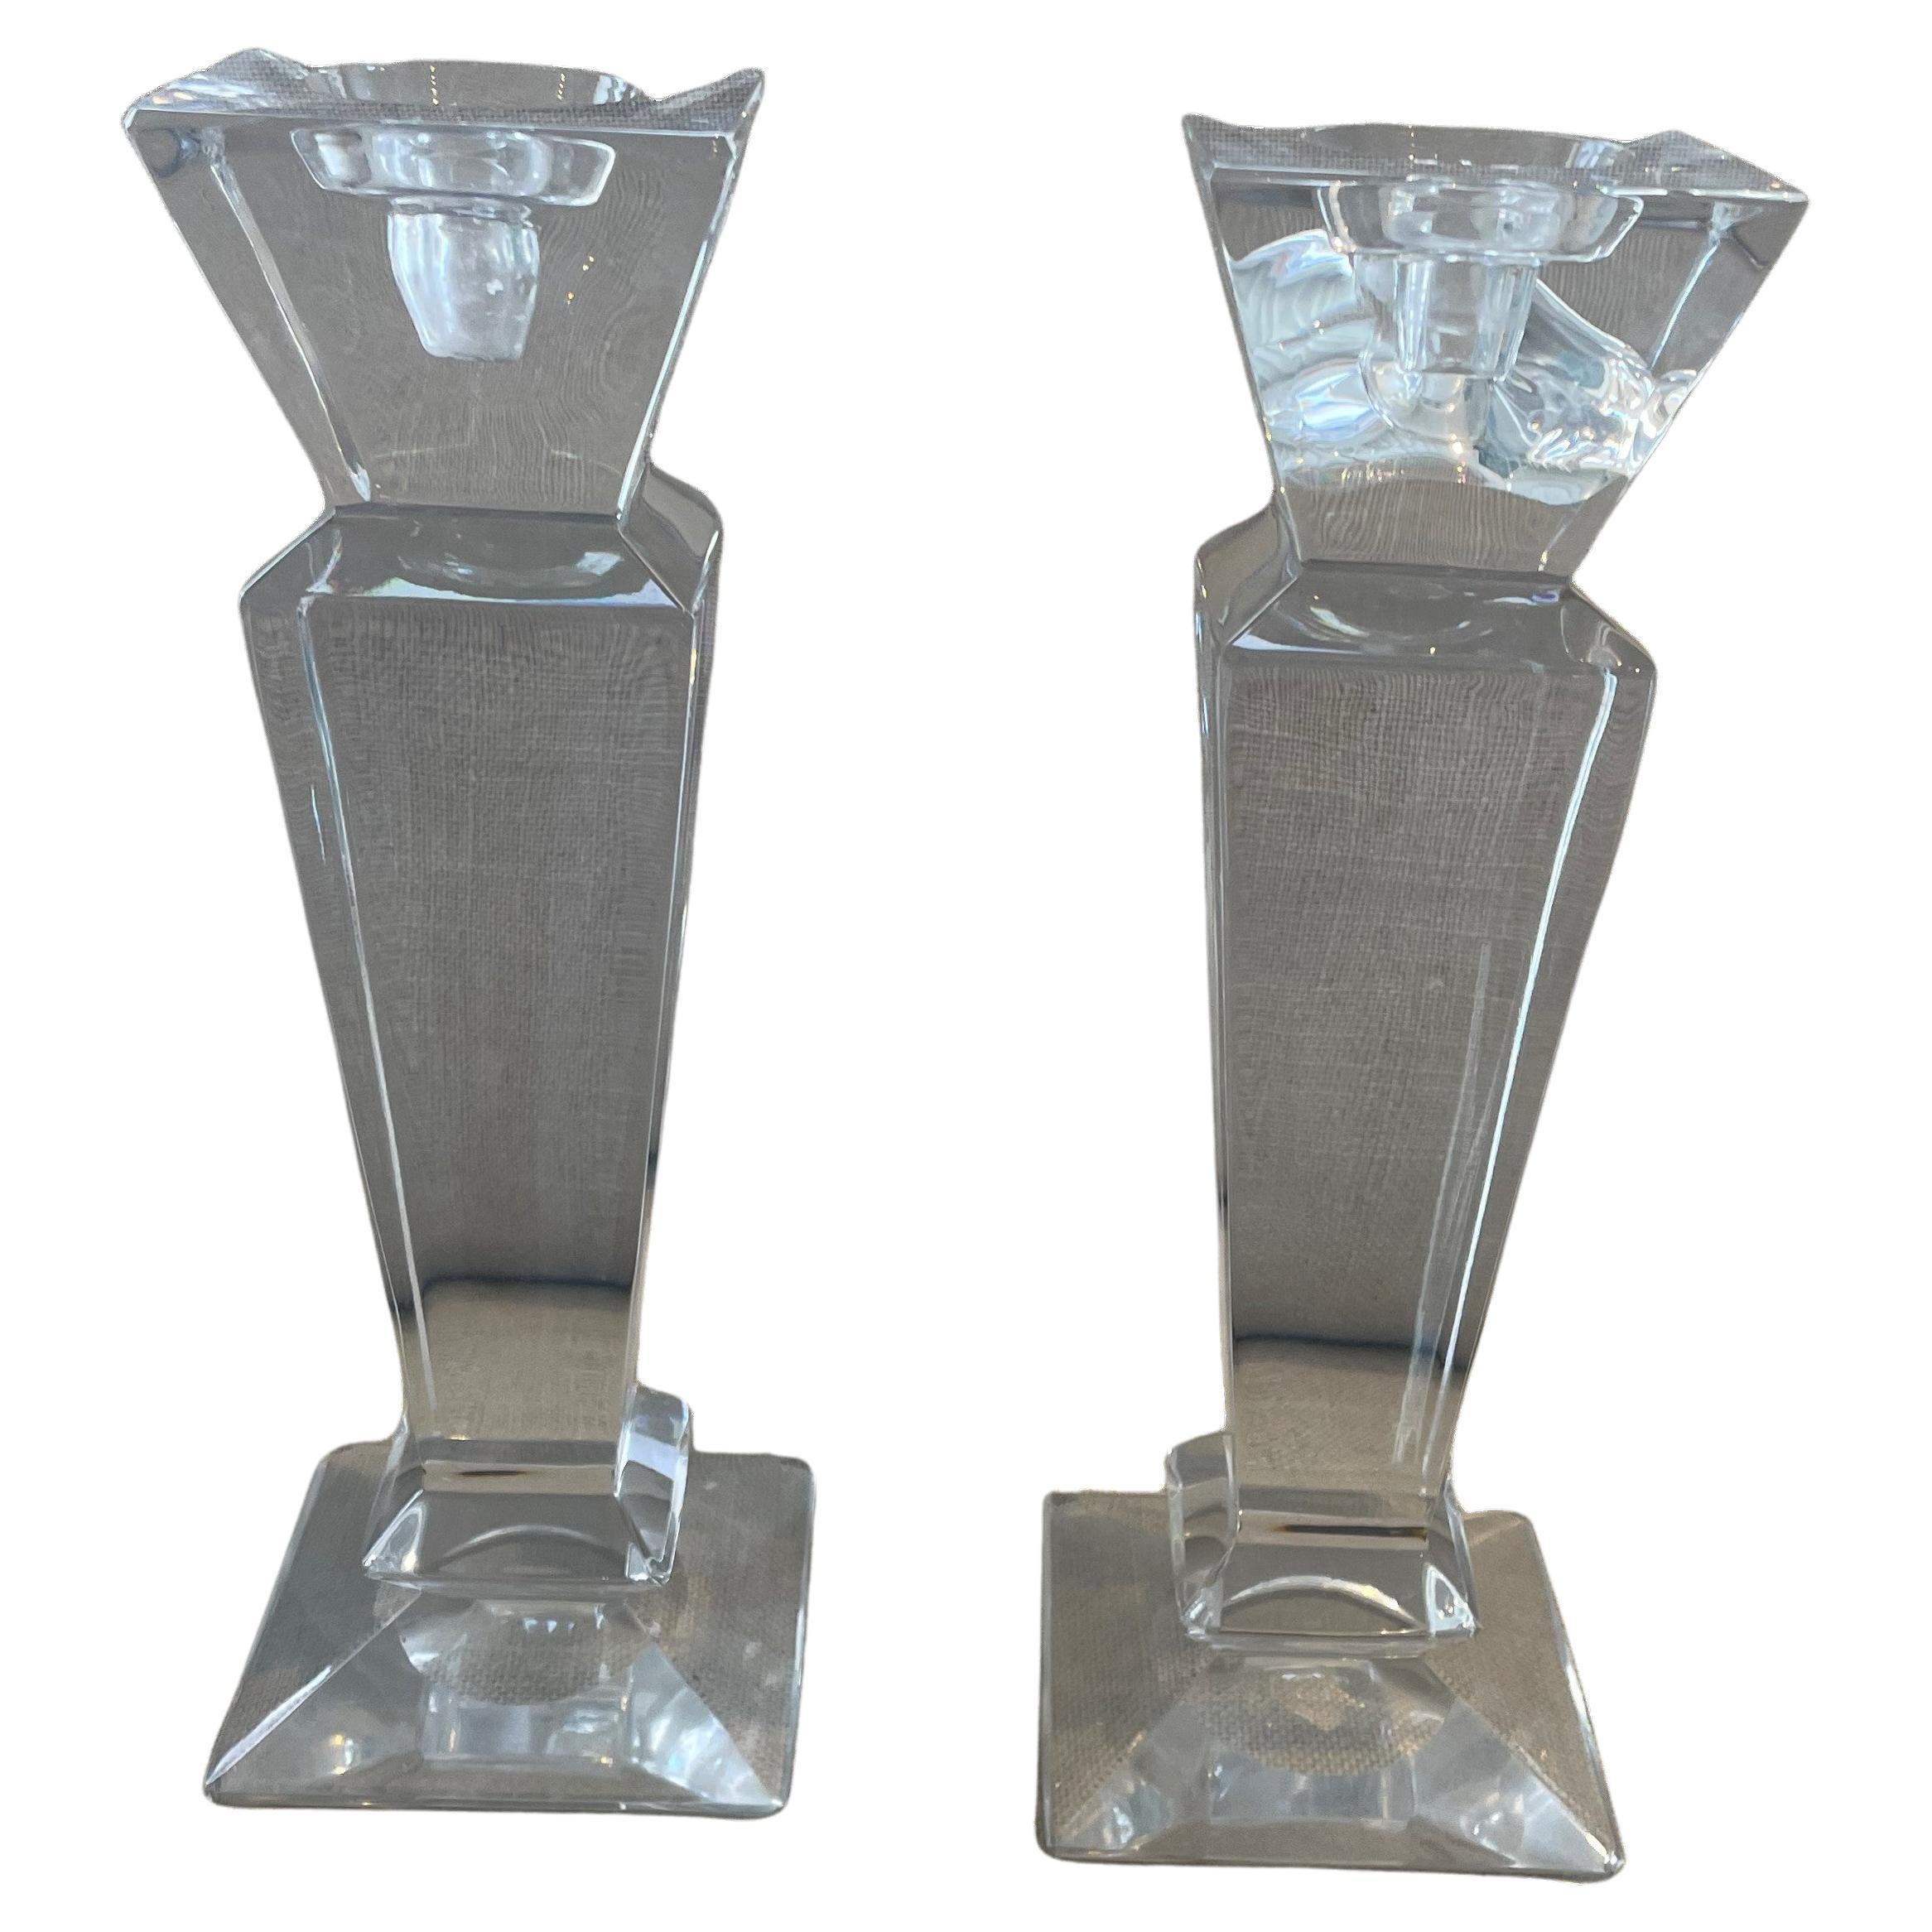 Pair Mid-century Pressed Glass Candle Holders